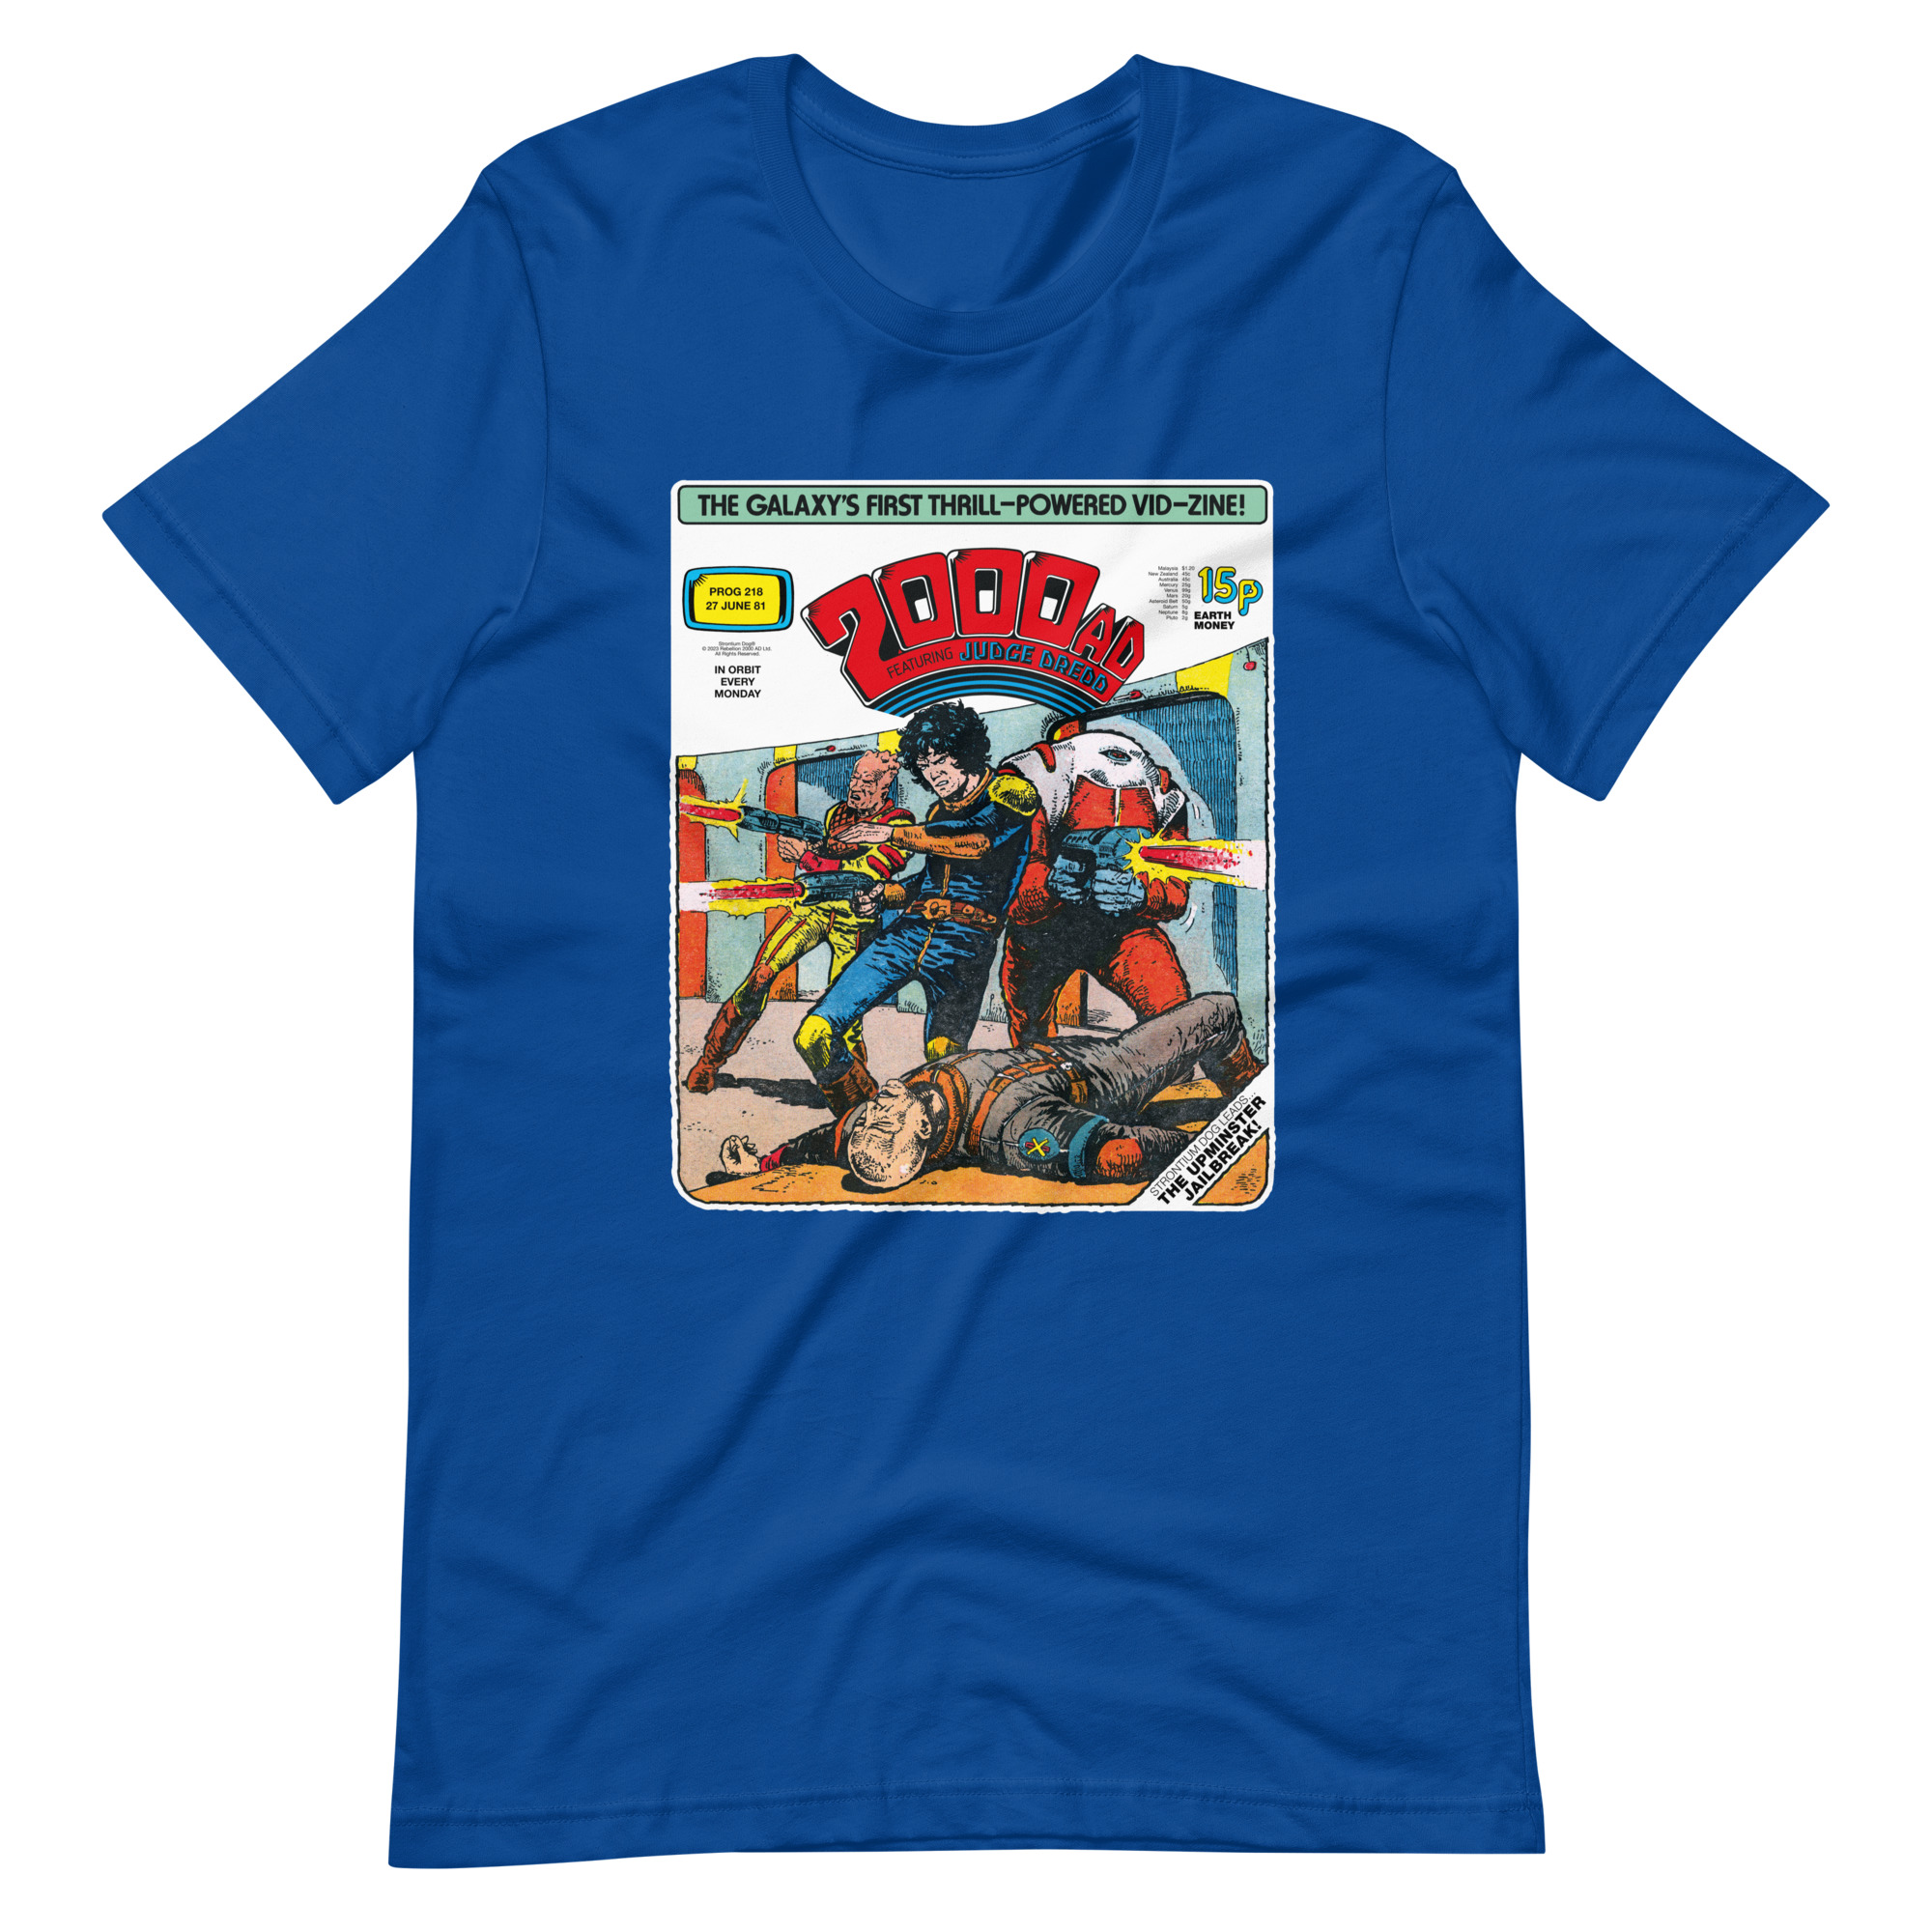 Blue Tshirt with an image on the chest. Image is cover of 2000 AD prog 218 and shows Strontium Dog and his allies, guns blazing